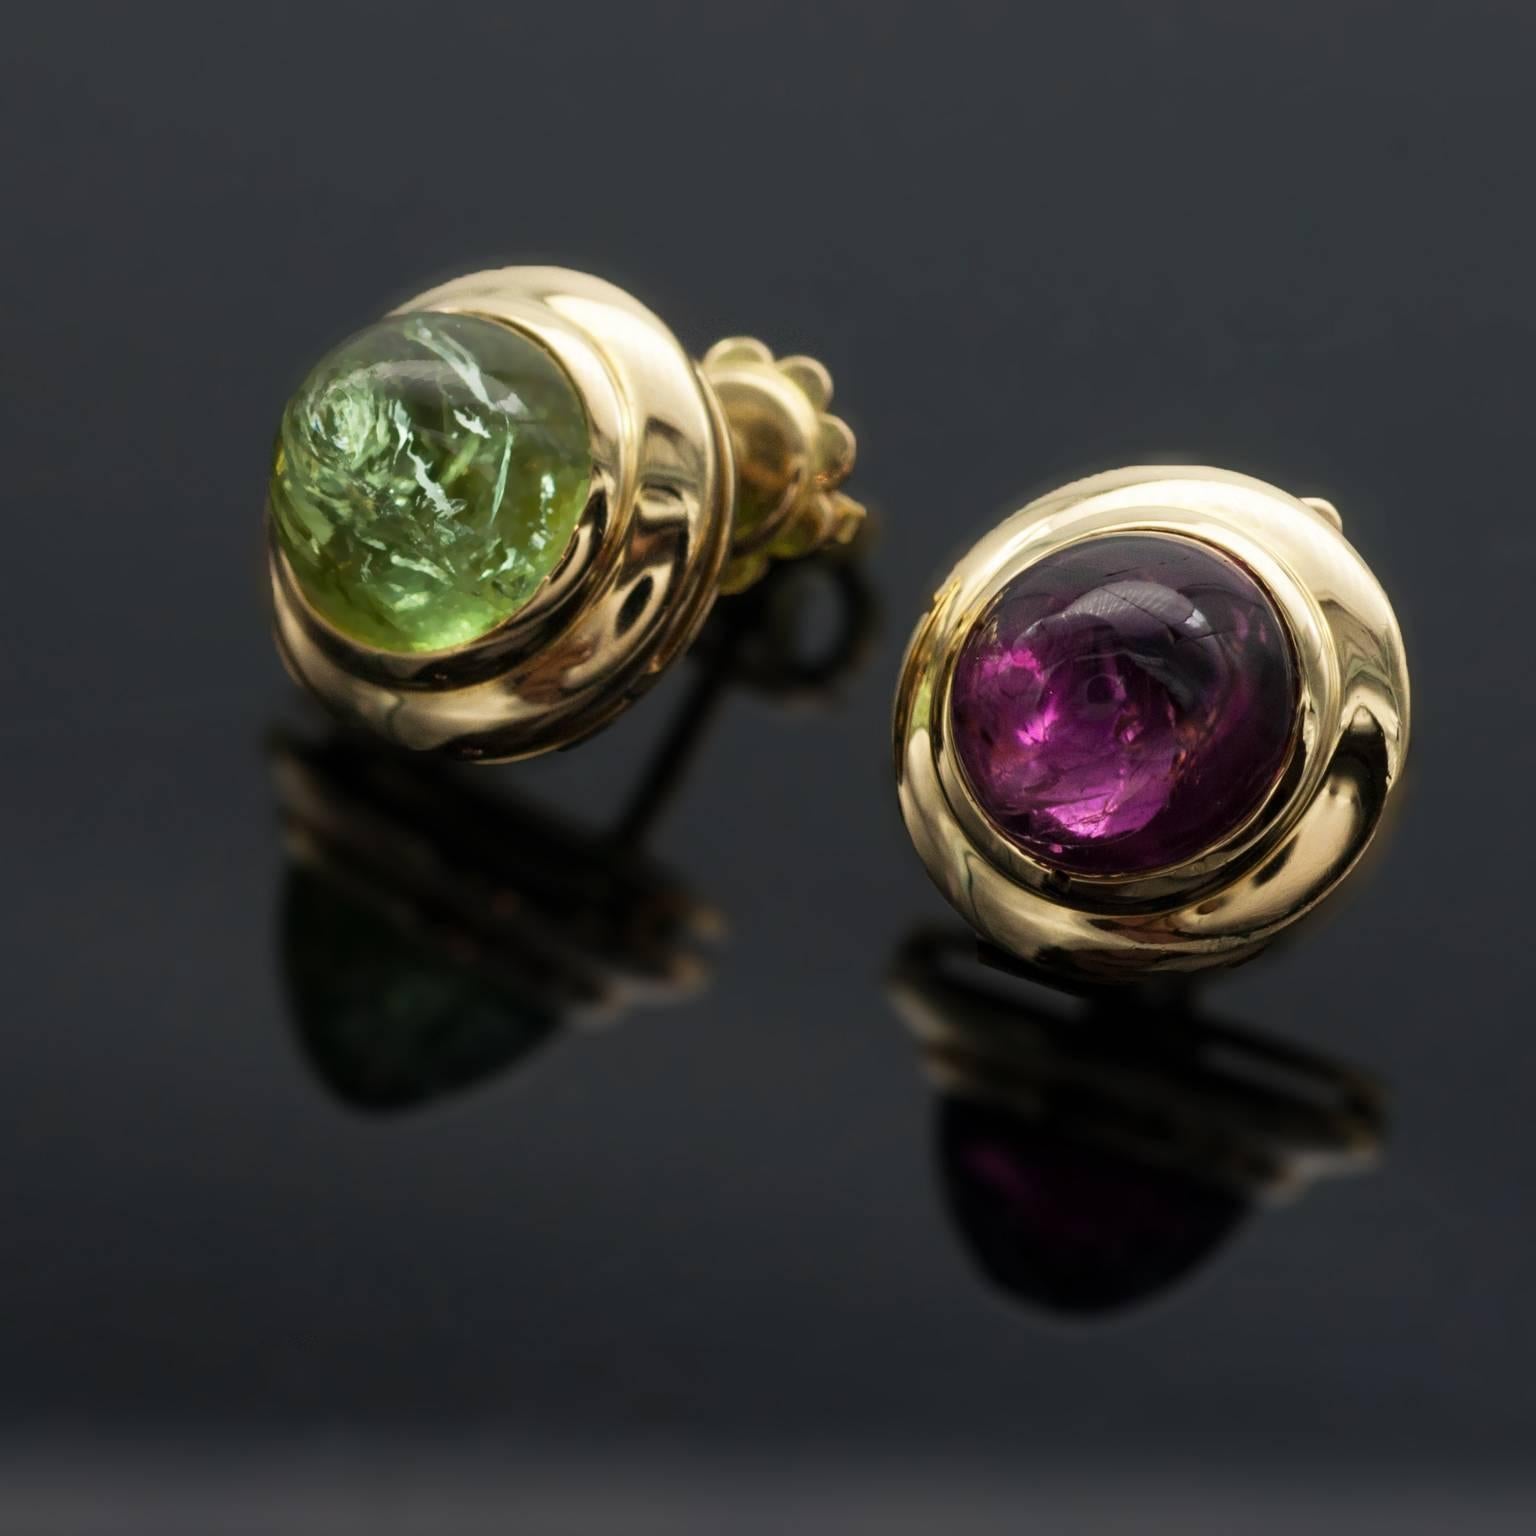 Joyful stud earrings and pendant set: Pink and green tourmaline cabochon simply but perfectly set in 18Kt Yellow gold.
Details: 
Tourmalines: 33.5 carat ; Diamonds: 0.12 carat G VS
Measures: 
Earrings: 1.3 cm - Pendant 4.5 x 2.4 cm 